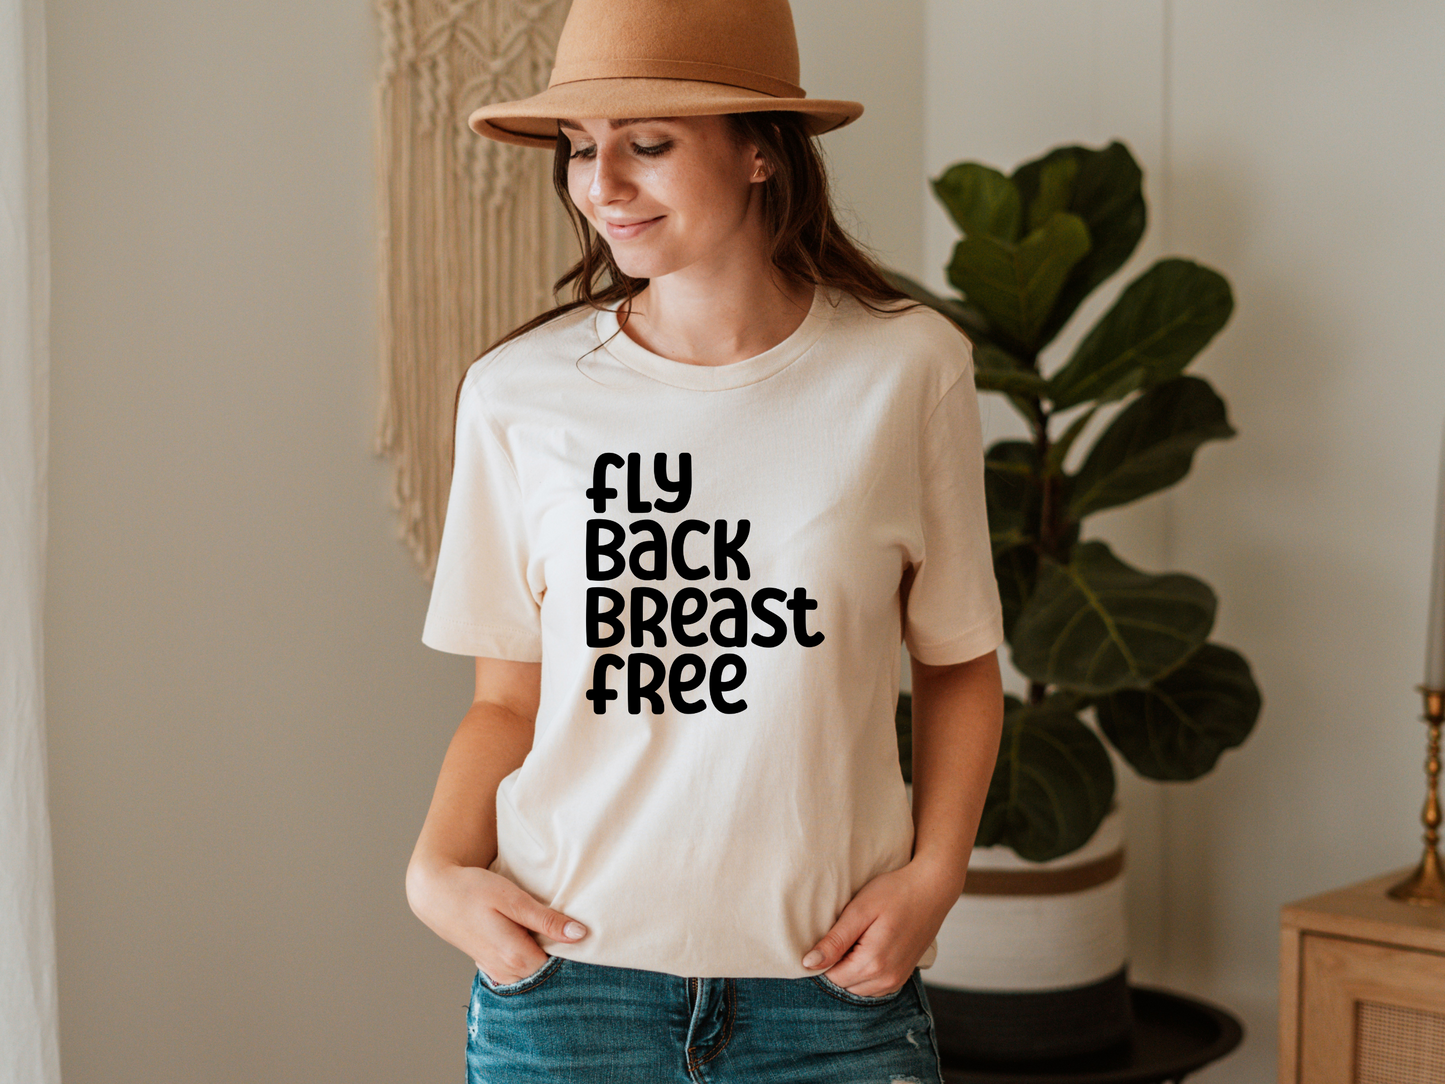 Fly. Back. Breast. Free.